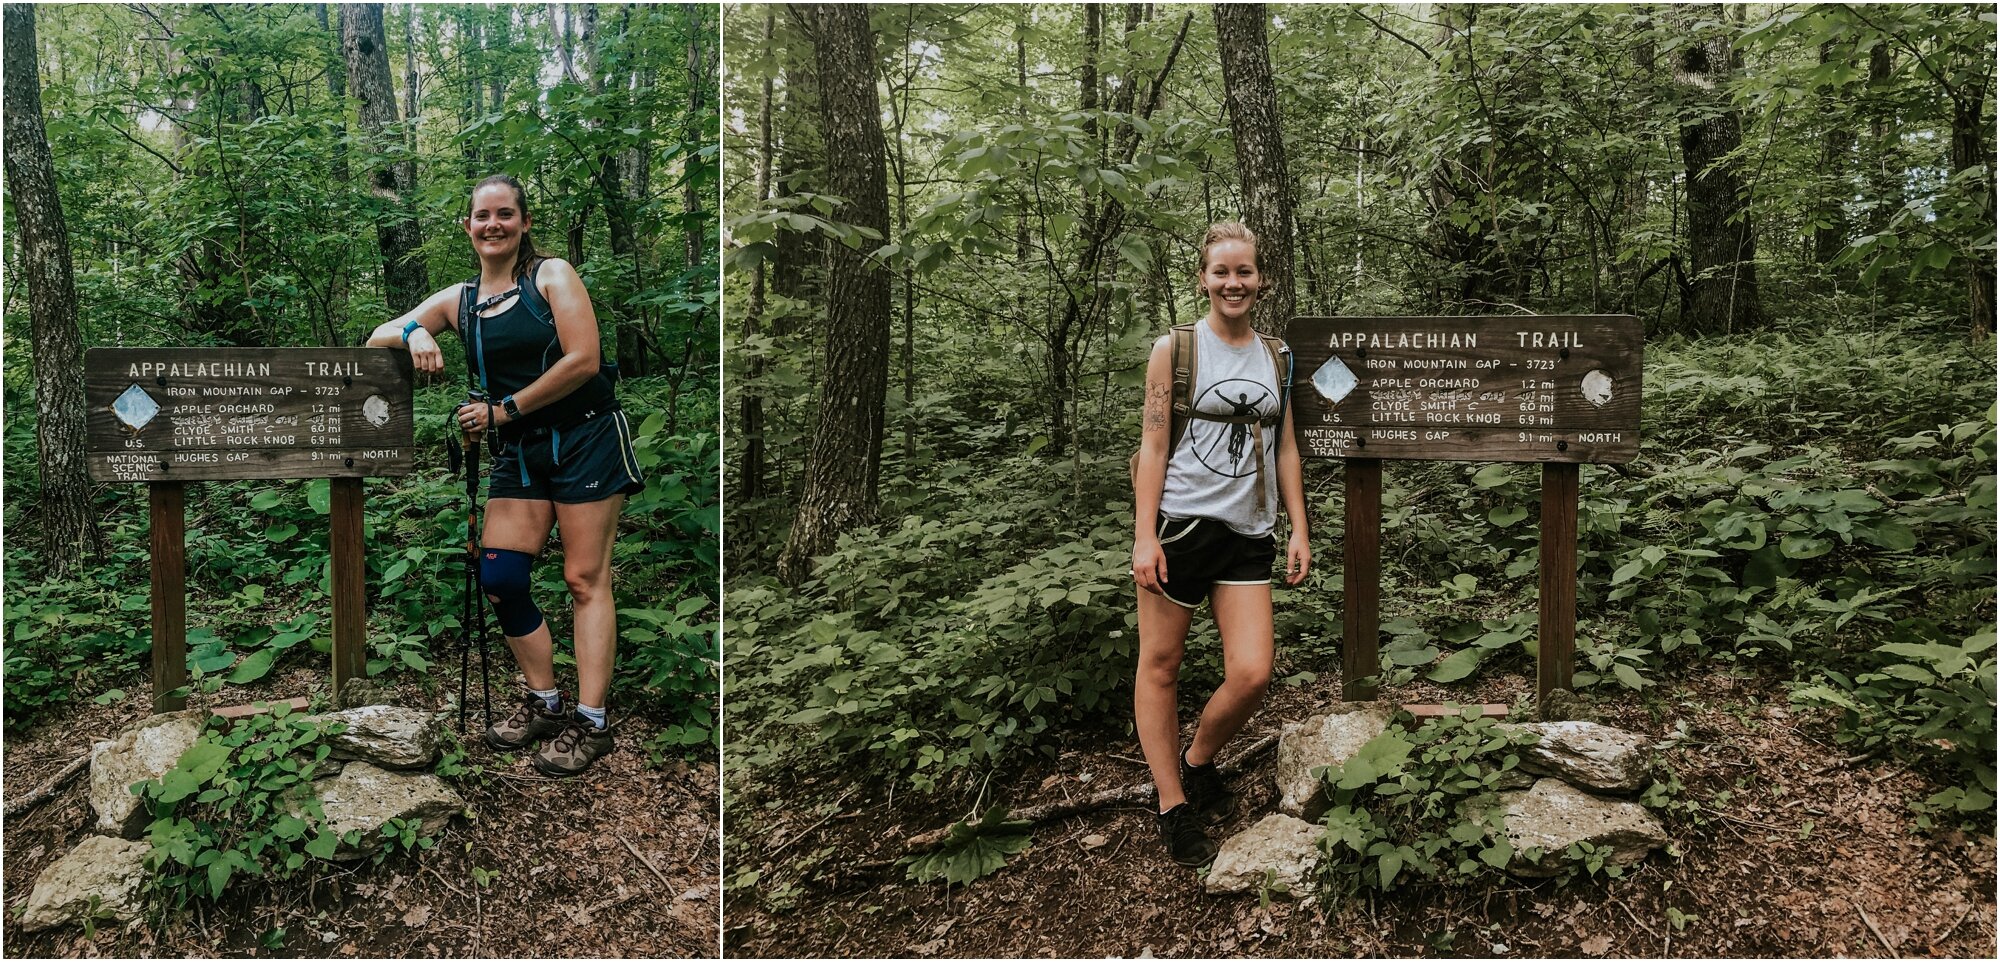   We also section hiked part of the Appalachian Trail in Tennessee! We ended up doing 30 miles total!  